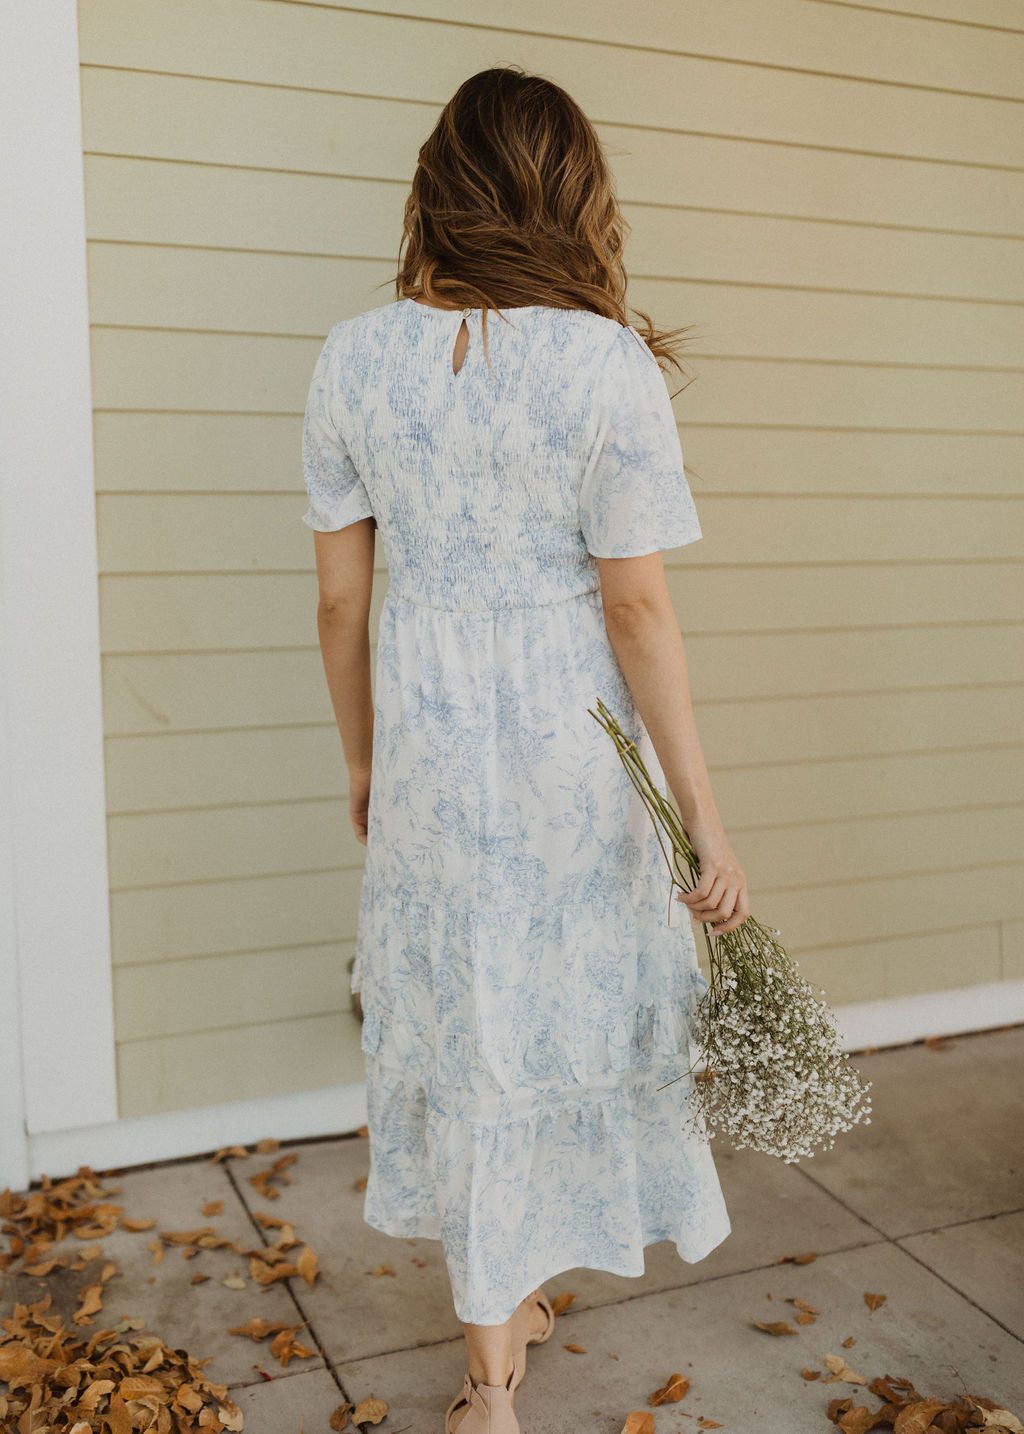 THE NOTHING BUT BLUE SKIES FLORAL MIDI DRESS IN LIGHT BLUE